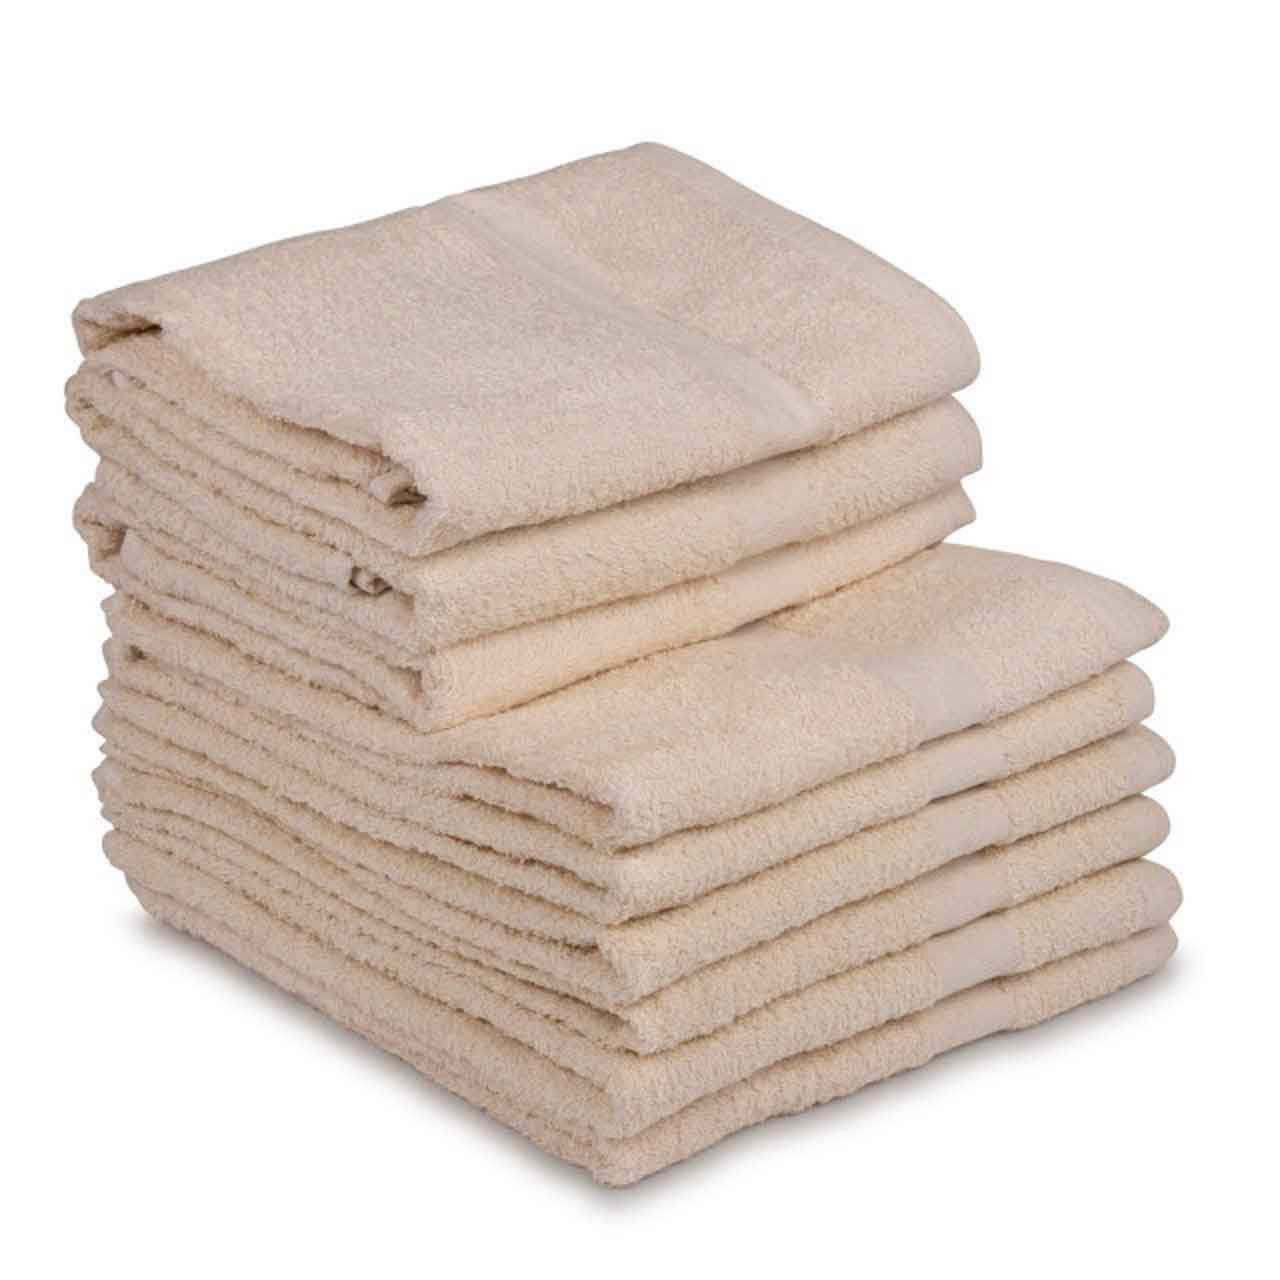 Where are the ecru towels shipped from before purchase?